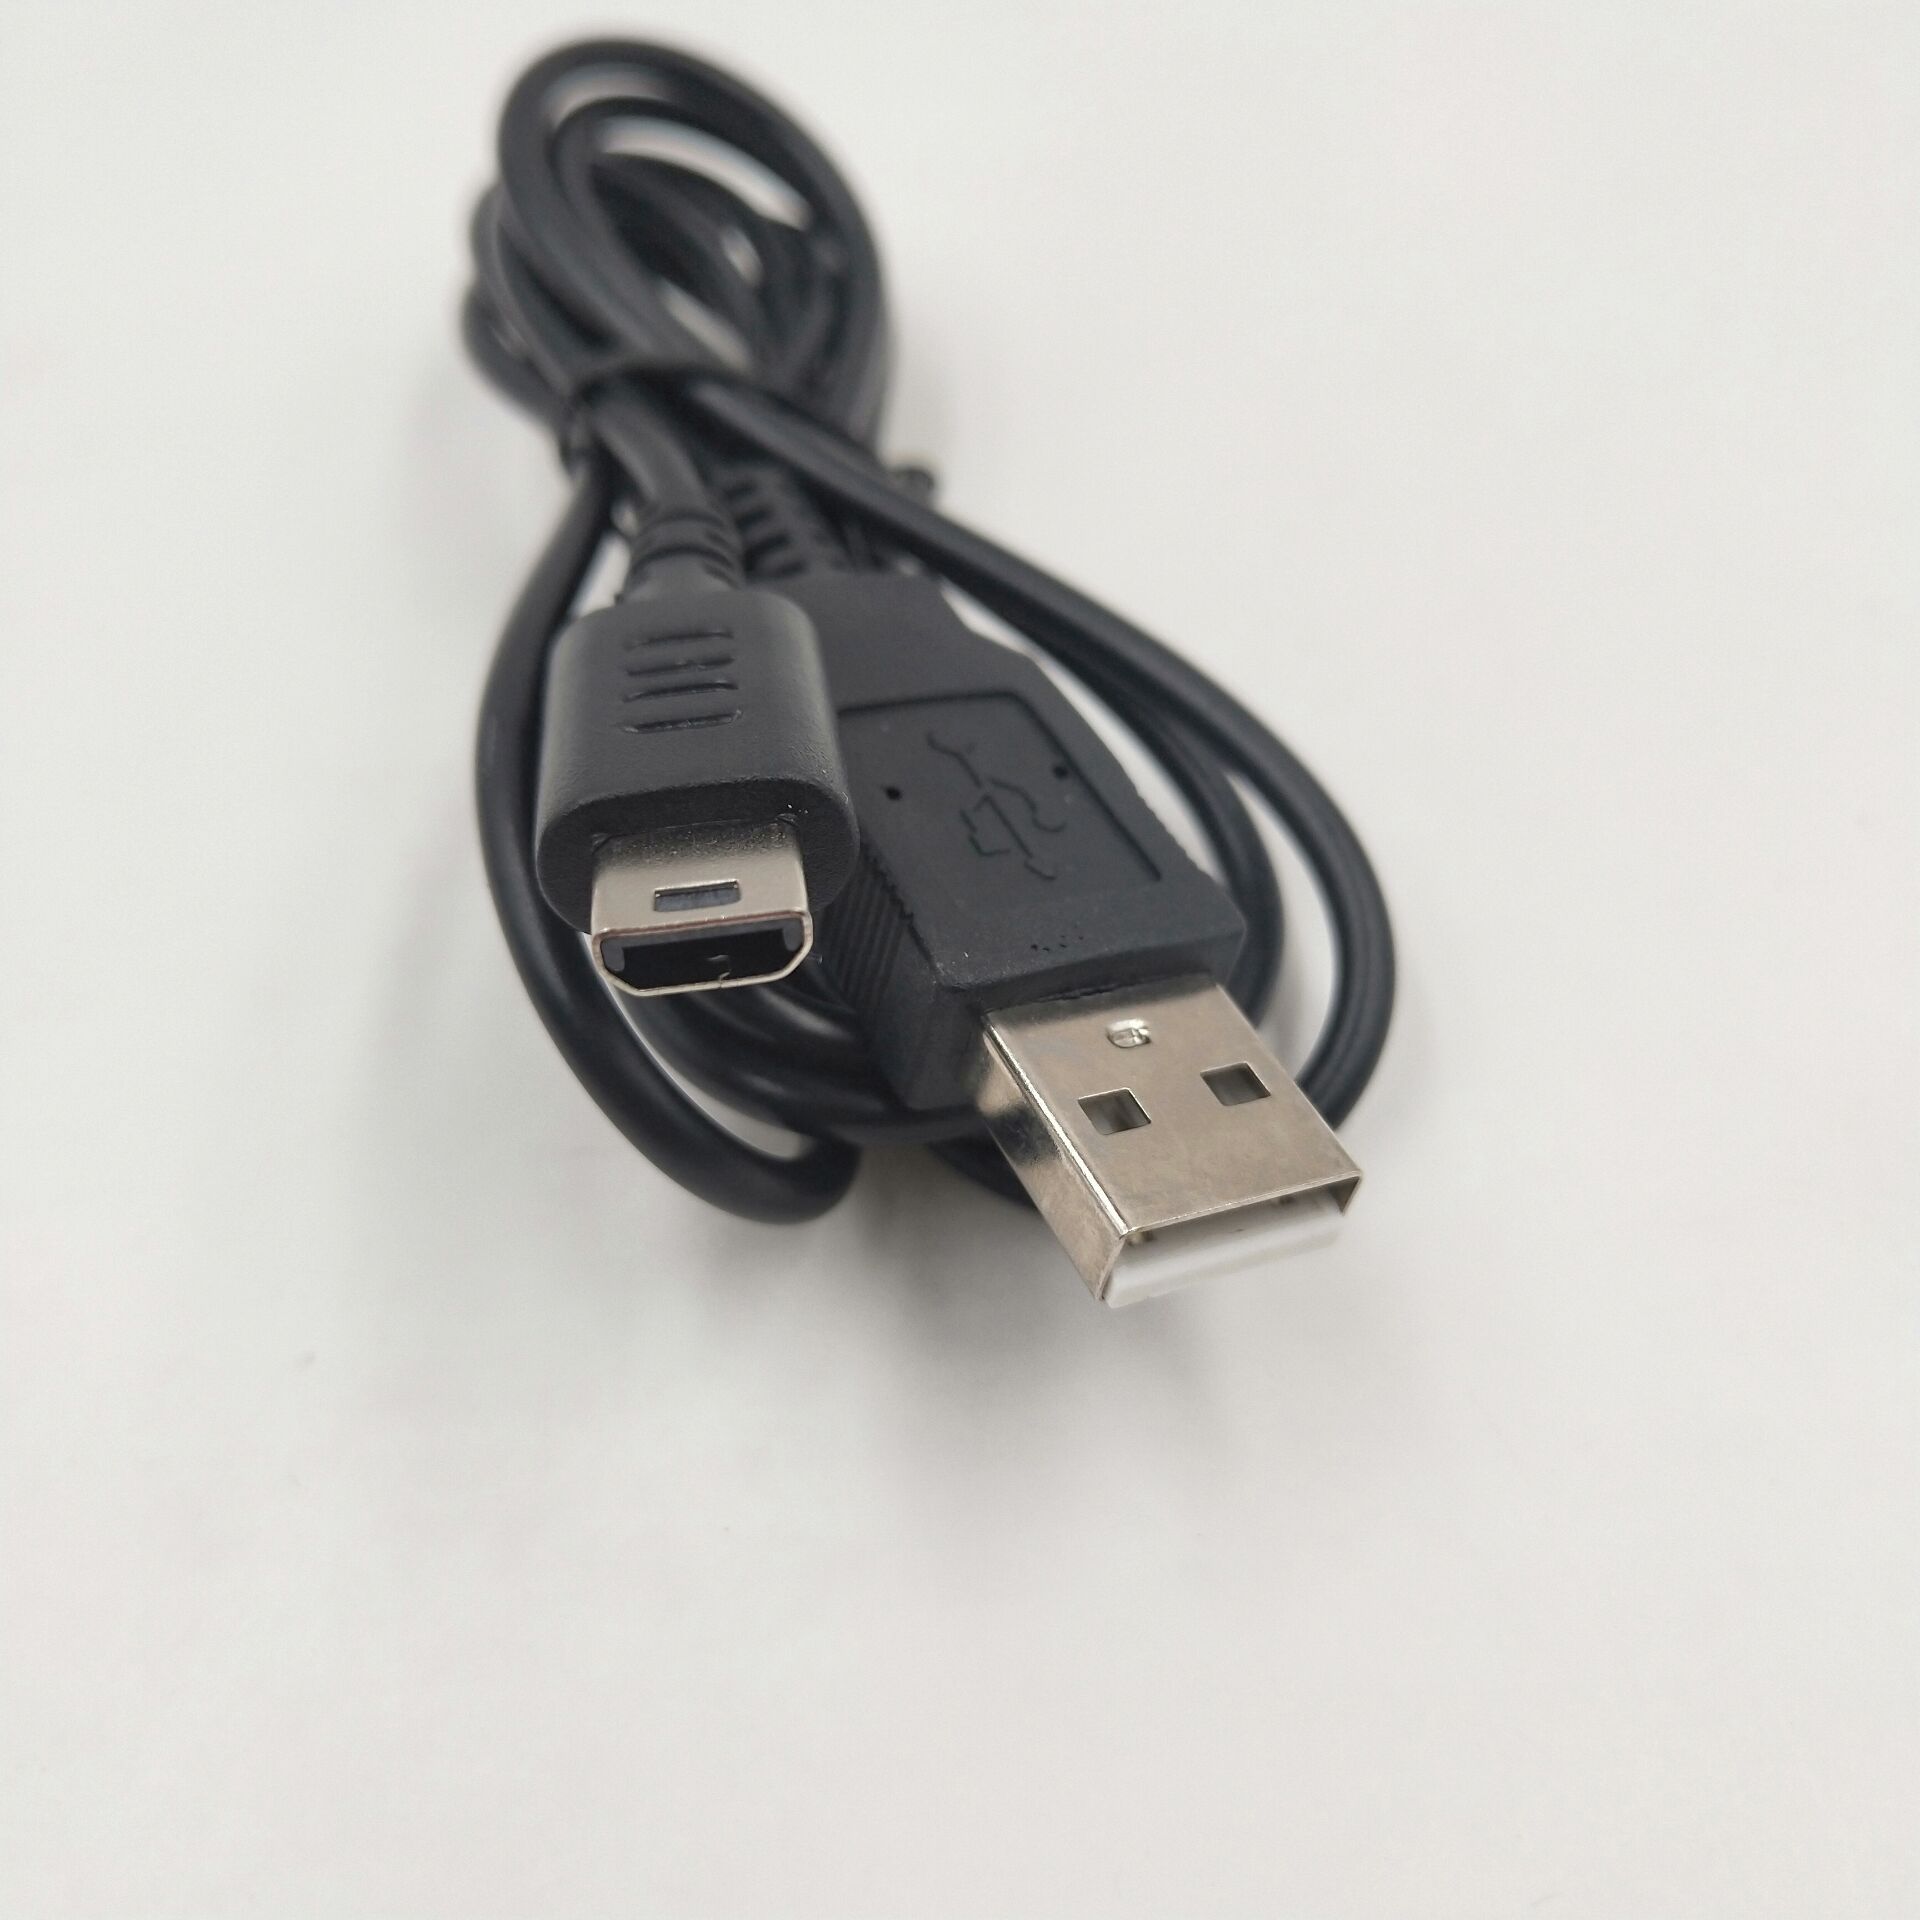 1.2M Black Color USB Cables Charger Charging Power Cable for Nintendo DS Lite DSL NDSL Data Sync Cable Cord